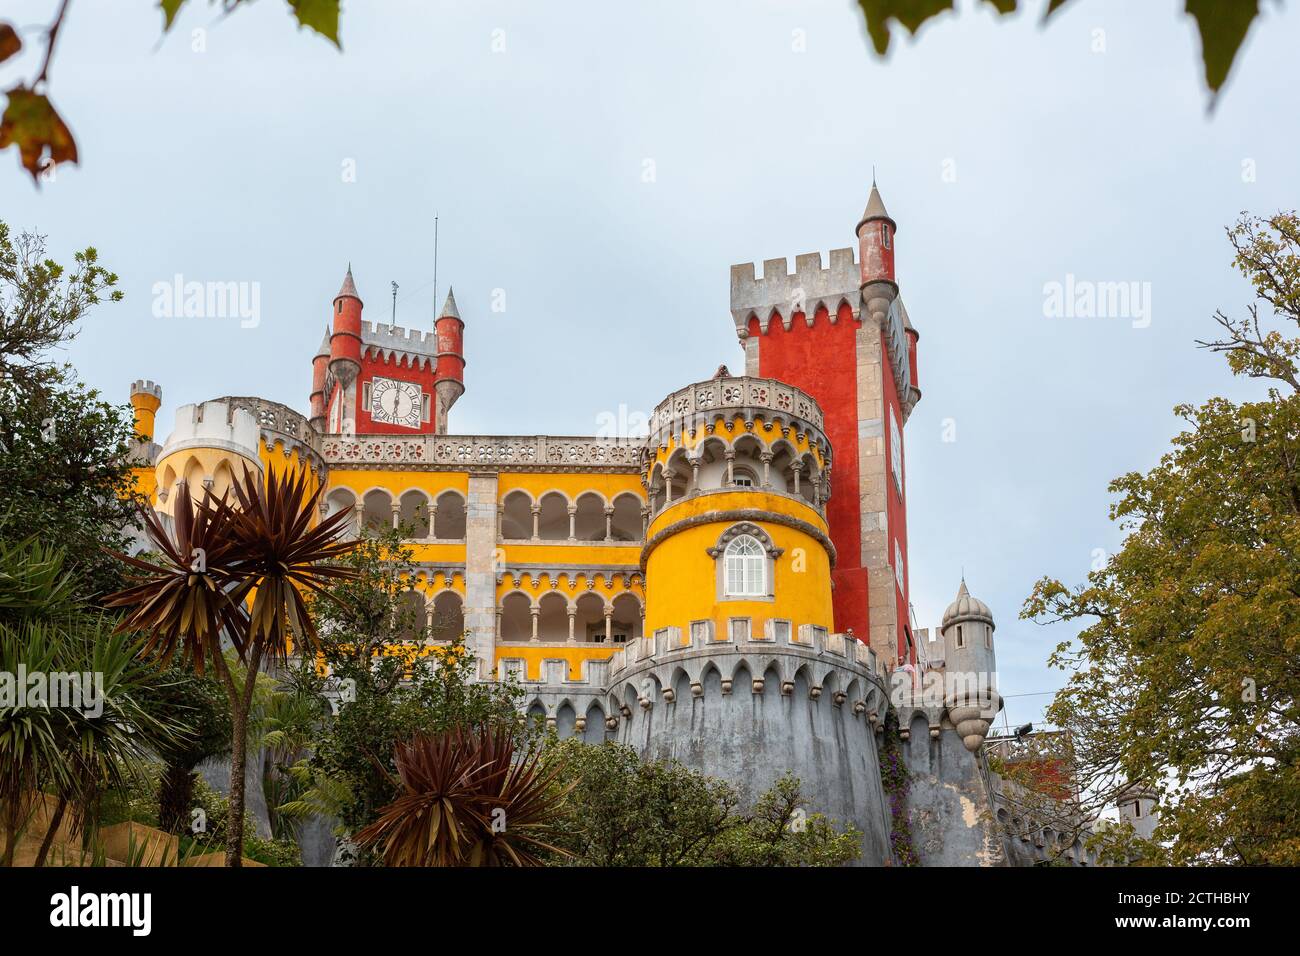 National Palace of Pena, Portugal. Famous castle near the city of Sintra, one of the most visited points of interest in Portugal. Stock Photo